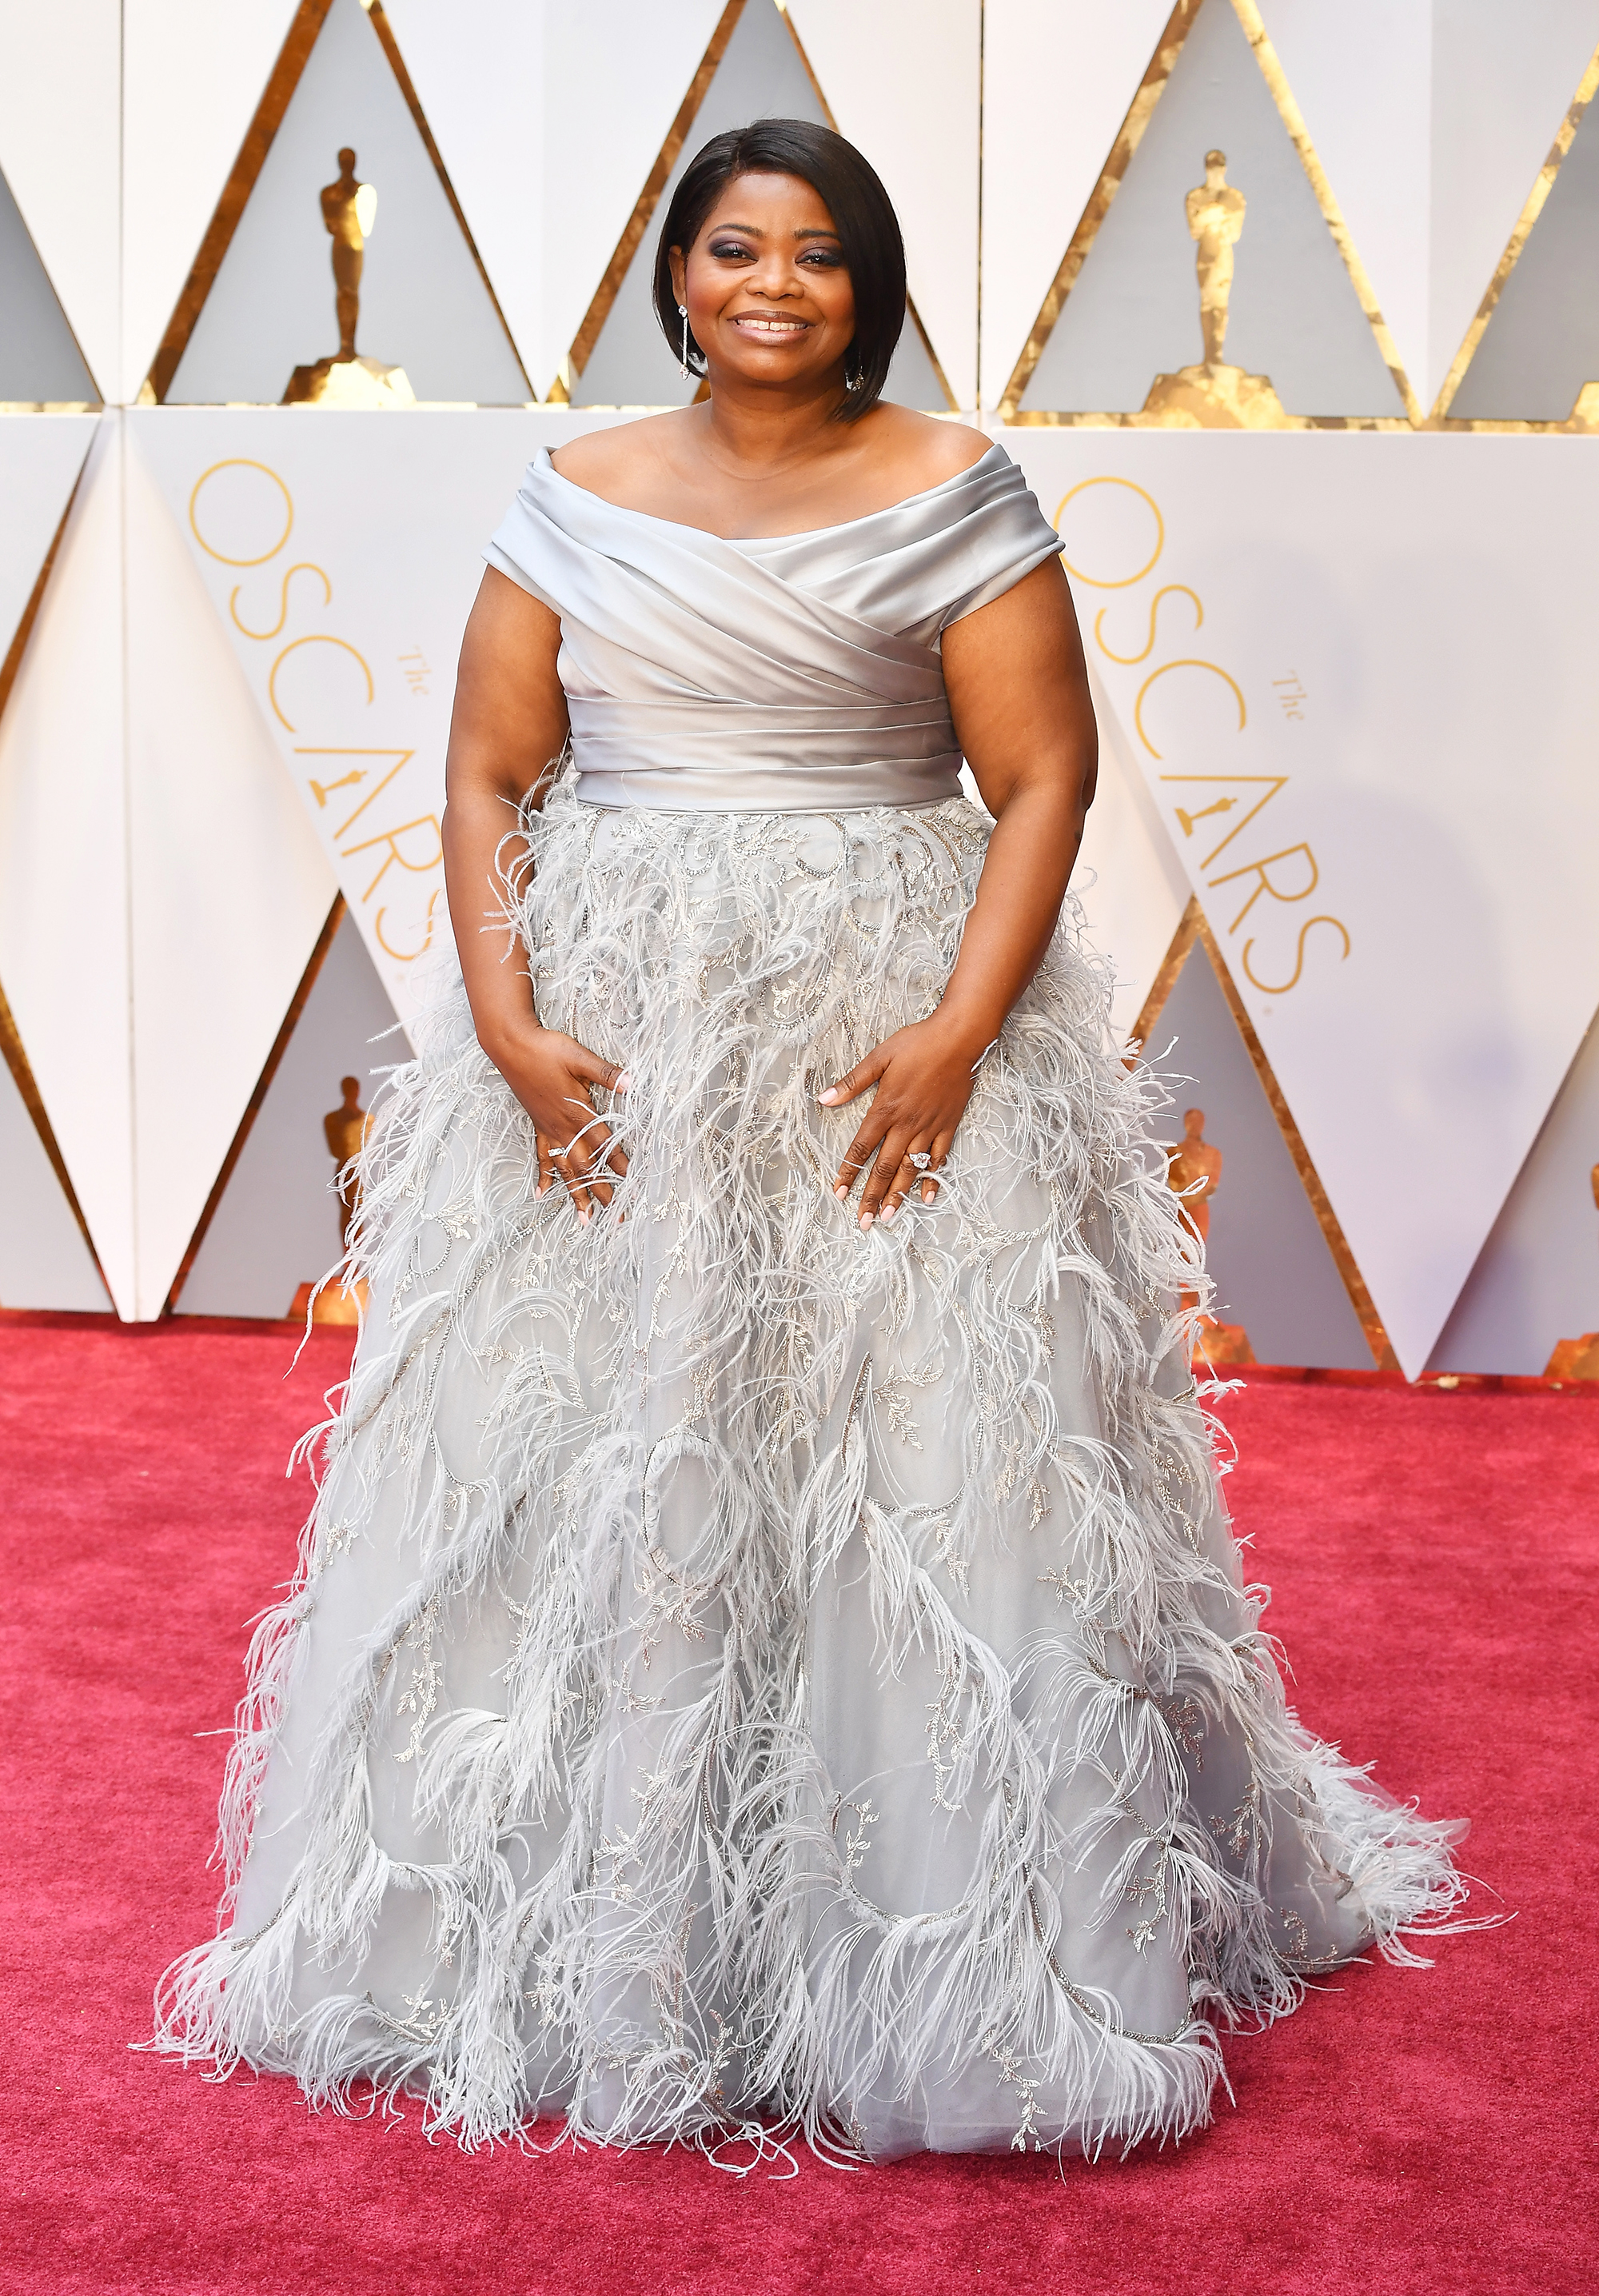 Octavia Spencer on the red carpet for the 89th Oscars, on Feb. 26, 2017 in Hollywood, Calif.